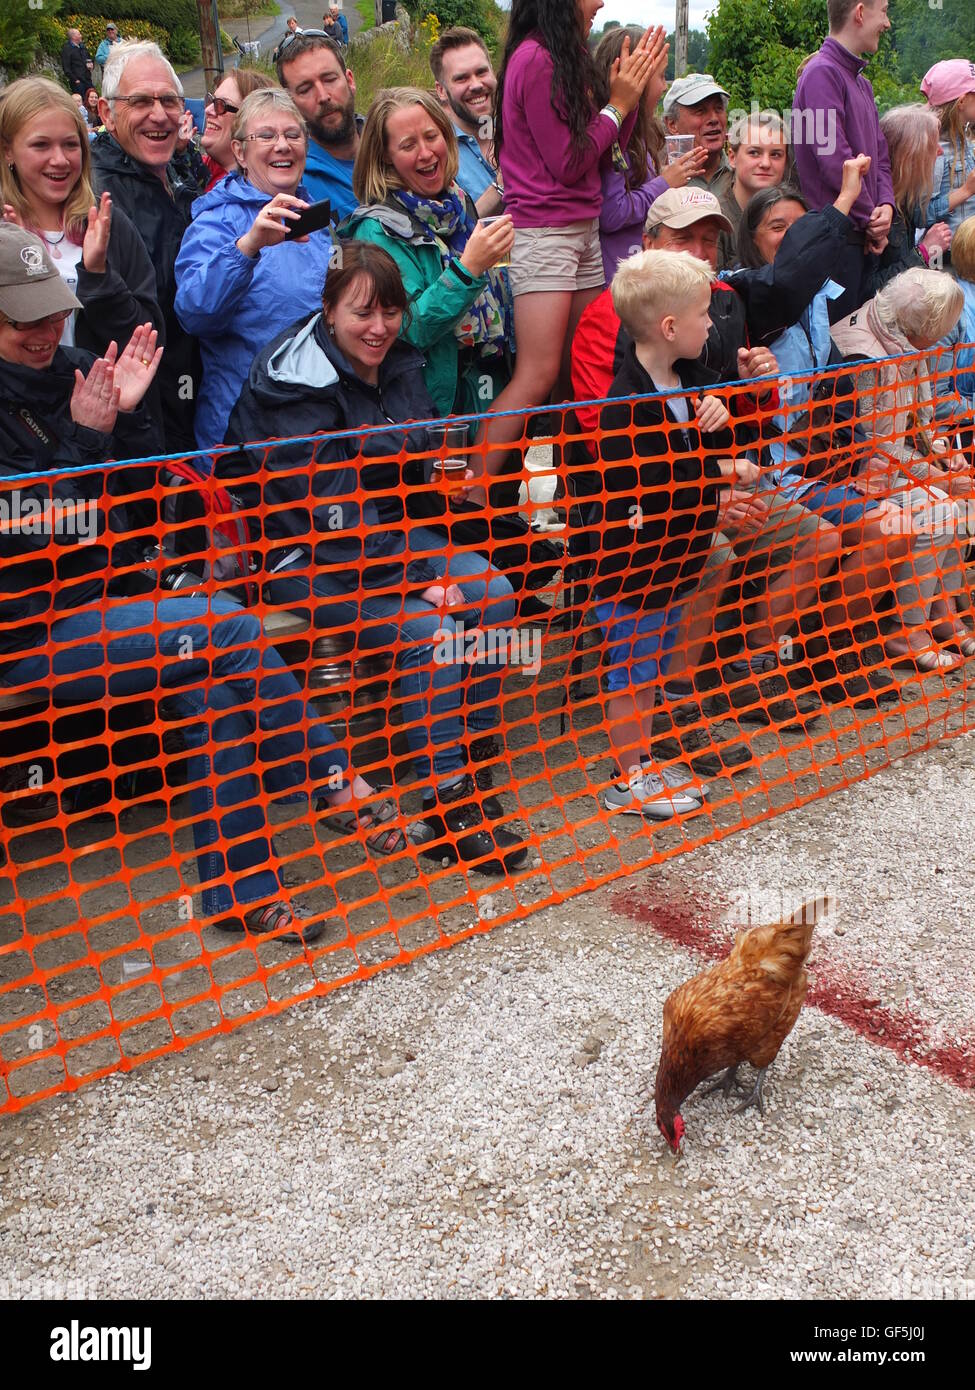 Spectators react to a hen crossing the finishing line at the World Championship Hen Racing, held at the Barley Mow, Bonsall Stock Photo